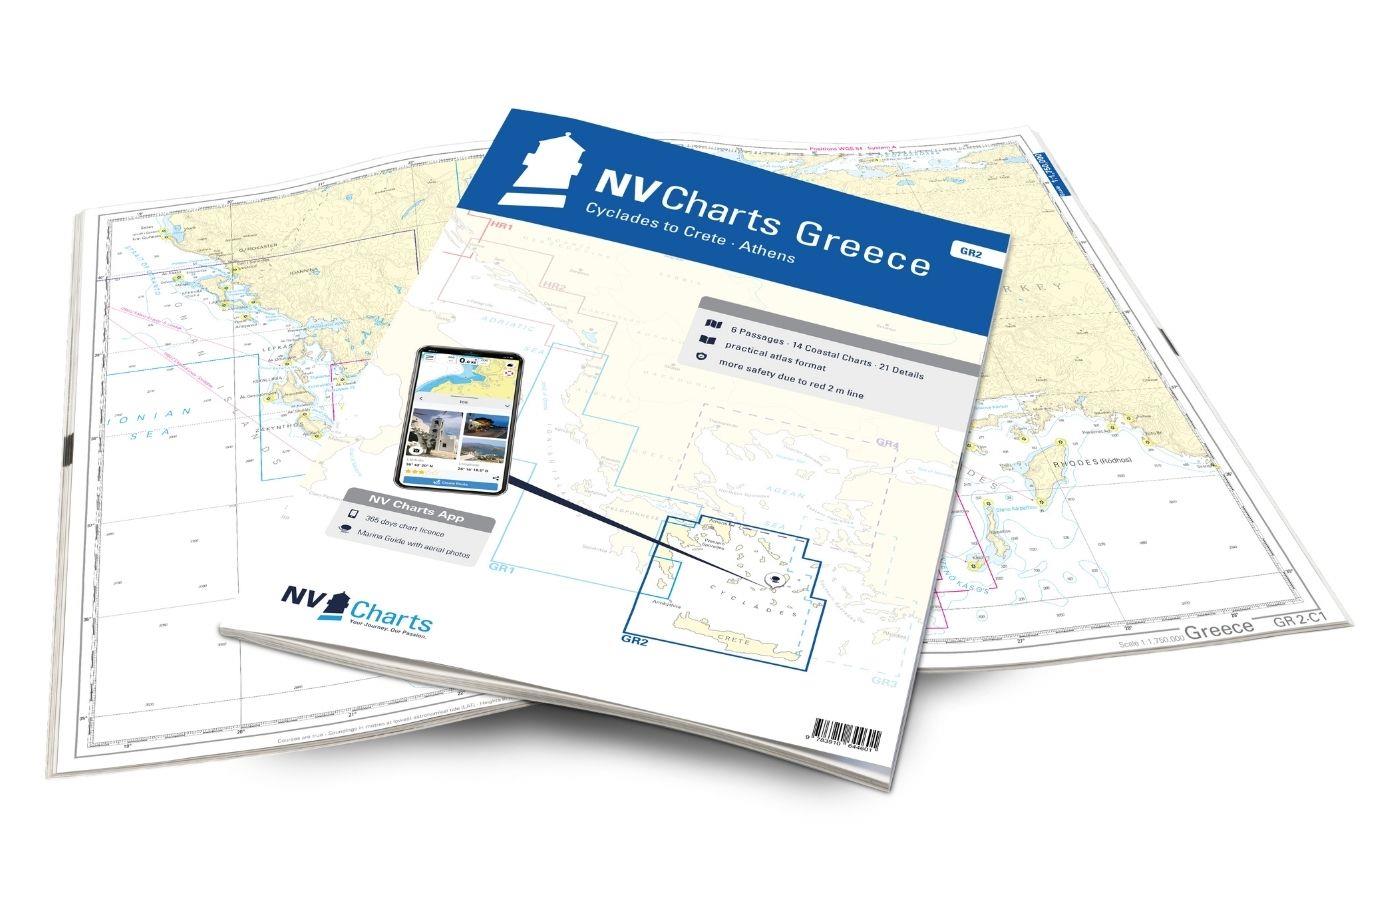 NV Charts Greece GR2 - Cyclades to Crete & Athens